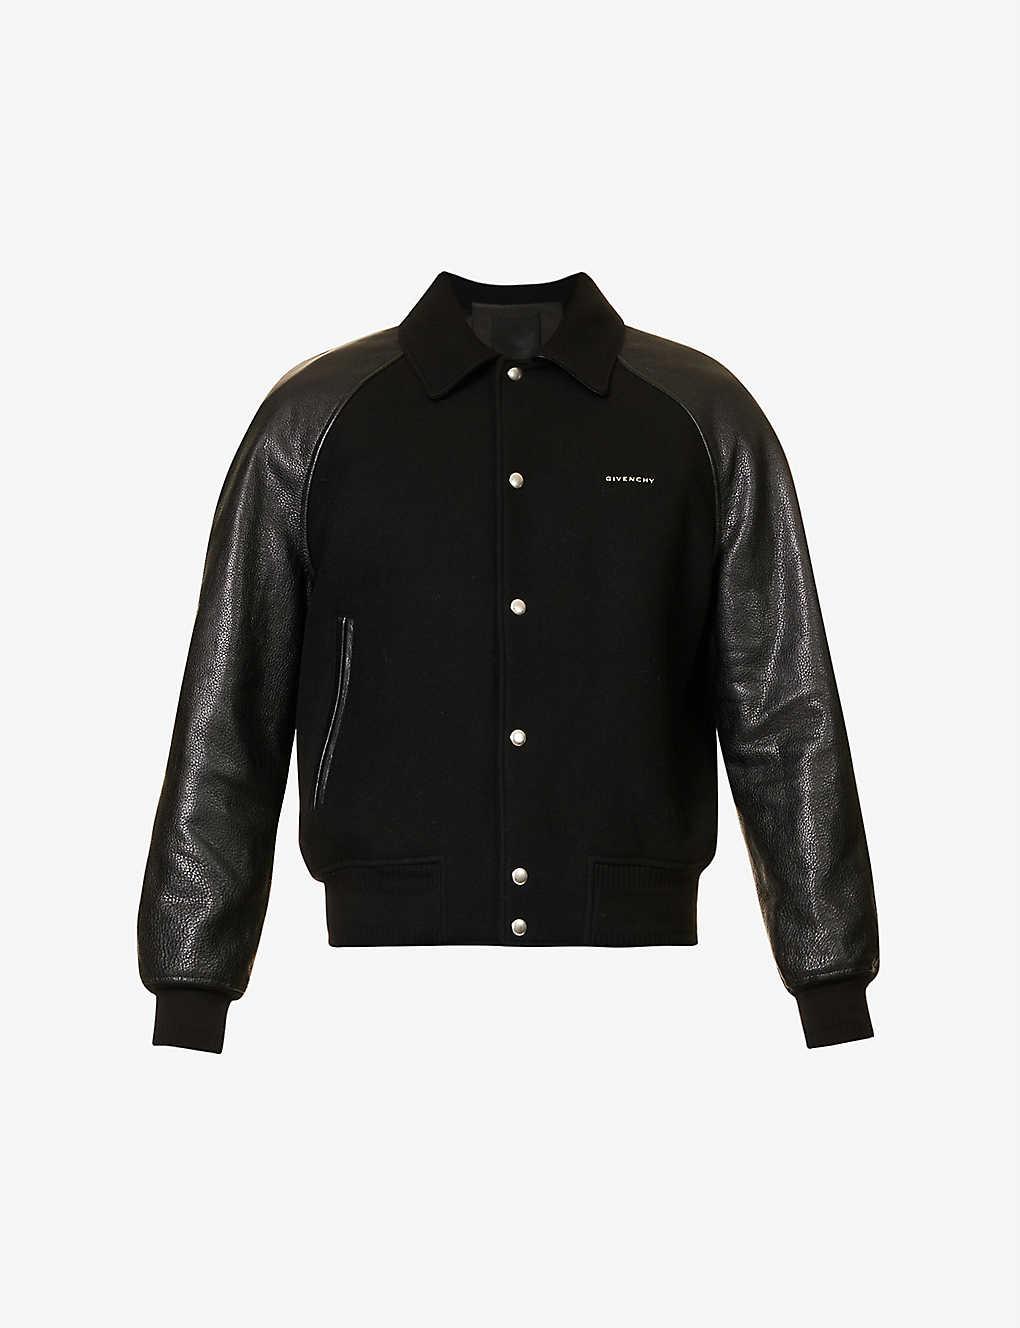 Givenchy Logo-plaque Spread-collar Leather Jacket in Black for Men | Lyst